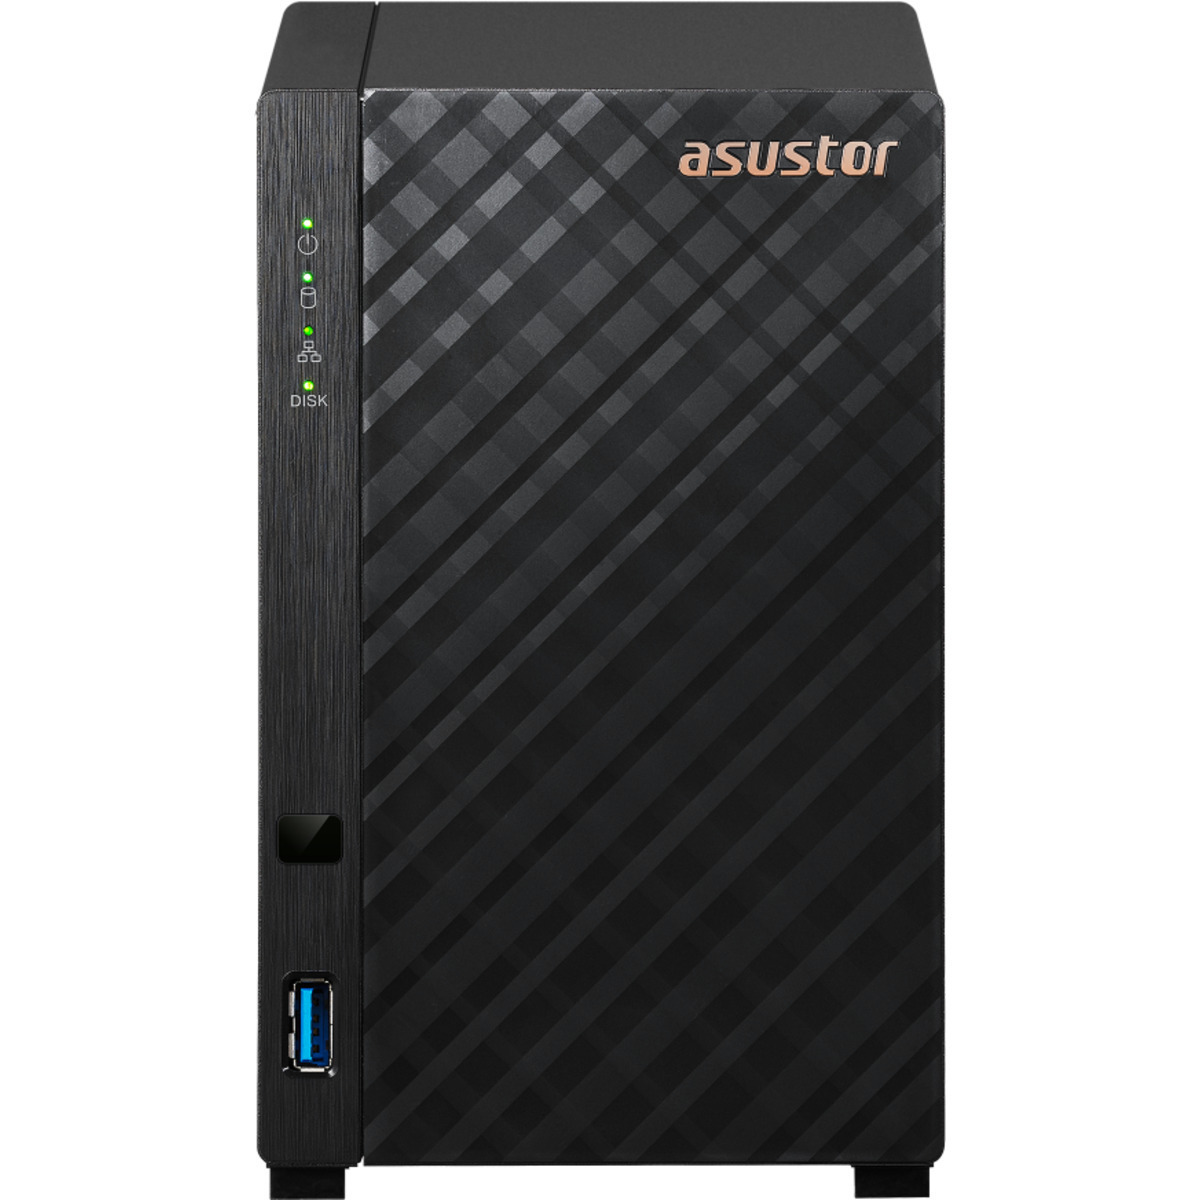 buy $395 ASUSTOR DRIVESTOR 2 AS1102T 1tb Desktop NAS - Network Attached Storage Device 2x500gb Samsung 870 EVO MZ-77E500BAM 2.5 560/530MB/s SATA 6Gb/s SSD CONSUMER Class Drives Installed - Burn-In Tested - nas headquarters buy network attached storage server device das new raid-5 free shipping usa DRIVESTOR 2 AS1102T